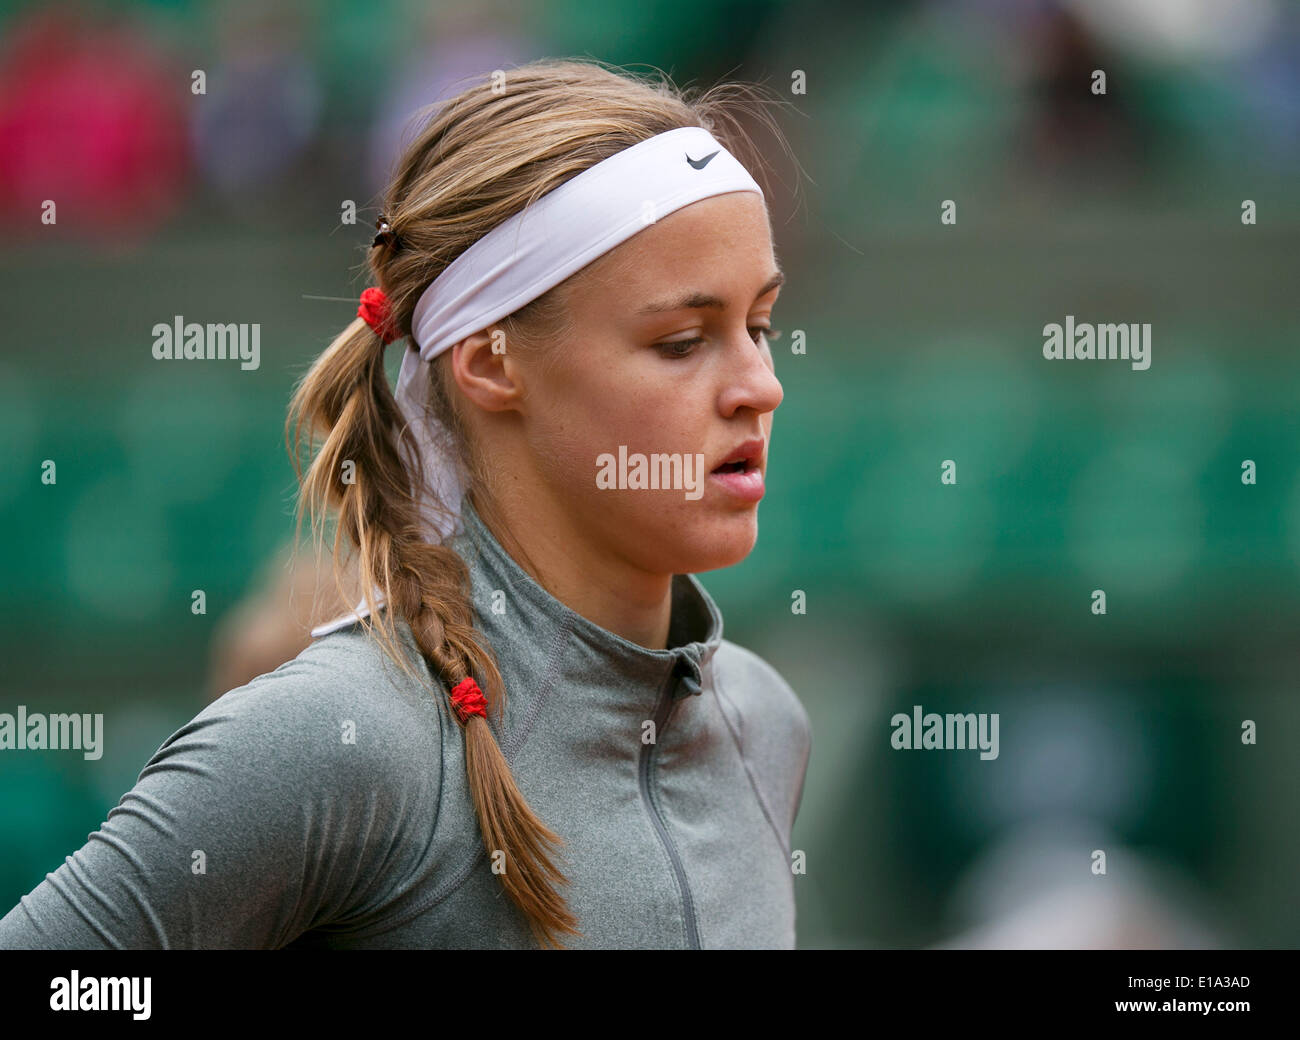 Paris, France. 28th May 2014. Tennis, French Open, Roland Garros, Anna Schmiedlova (SVK) Photo:Tennisimages/Henk Koster/Alamy Live News  Stock Photo